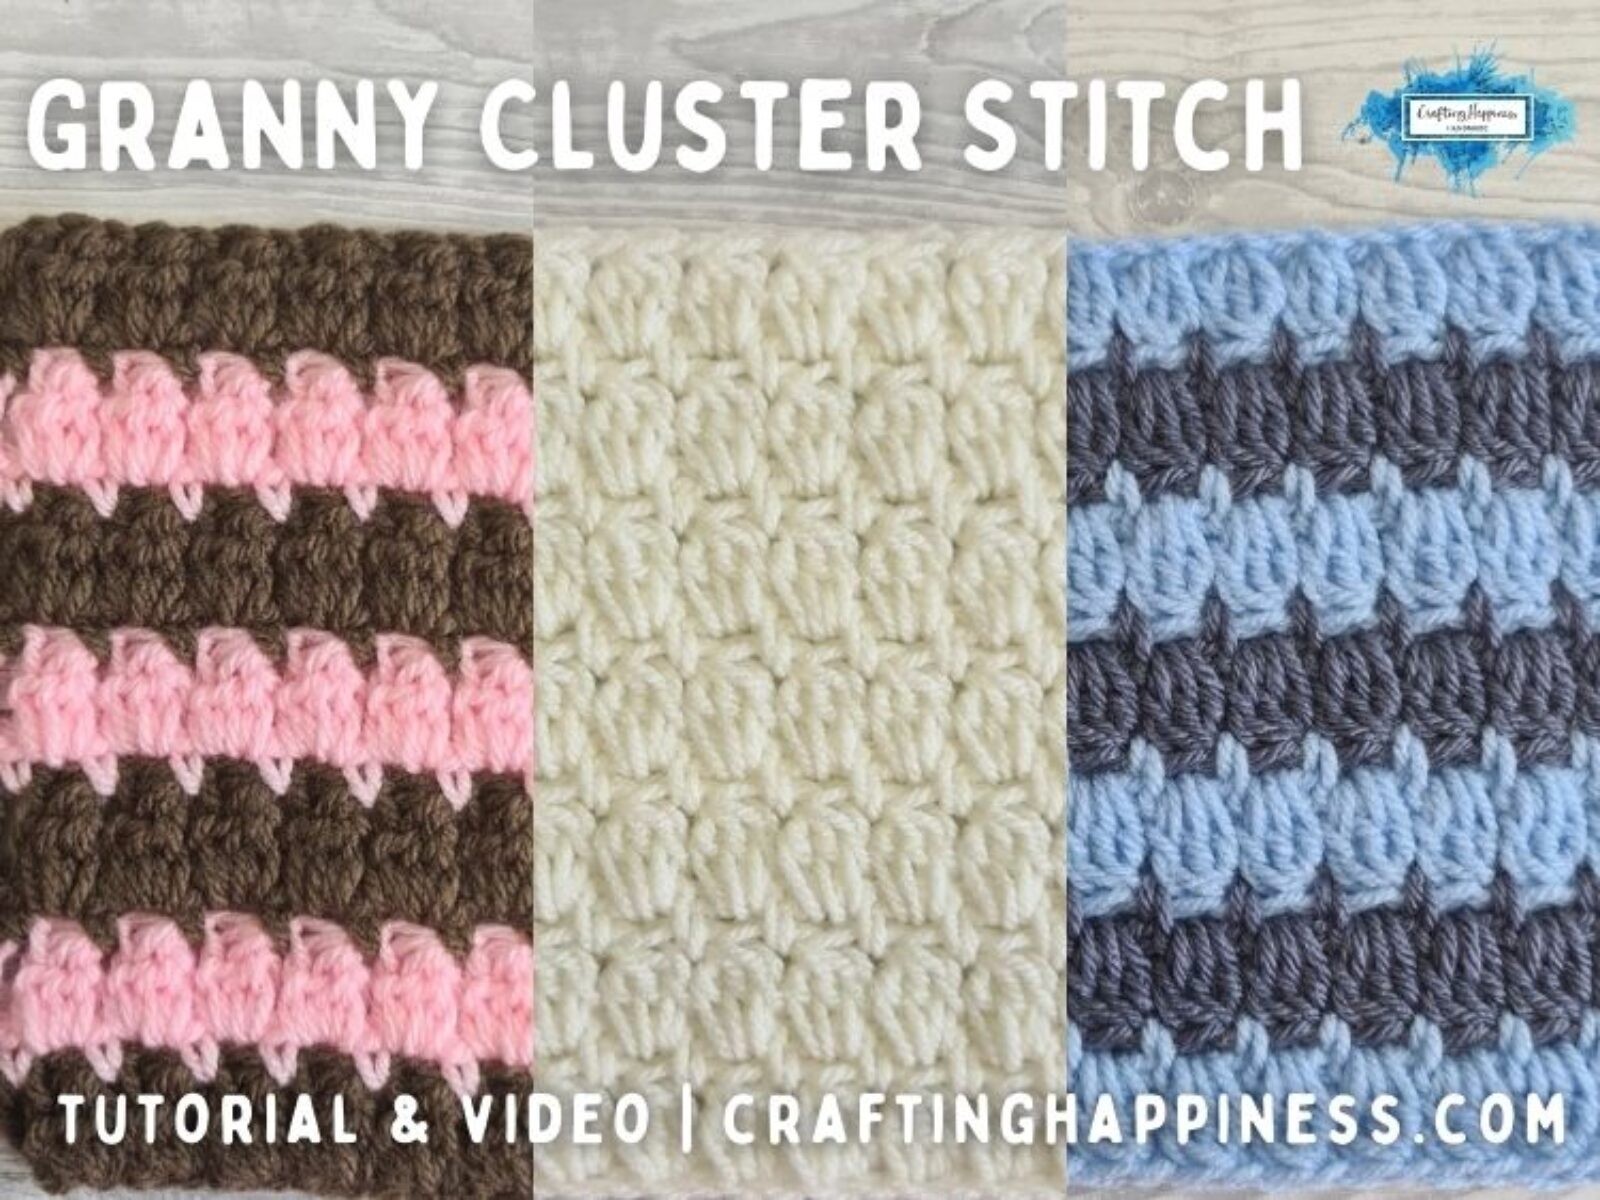 FB BLOG POSTER 2 - Granny Cluster Stitch Crafting Happiness